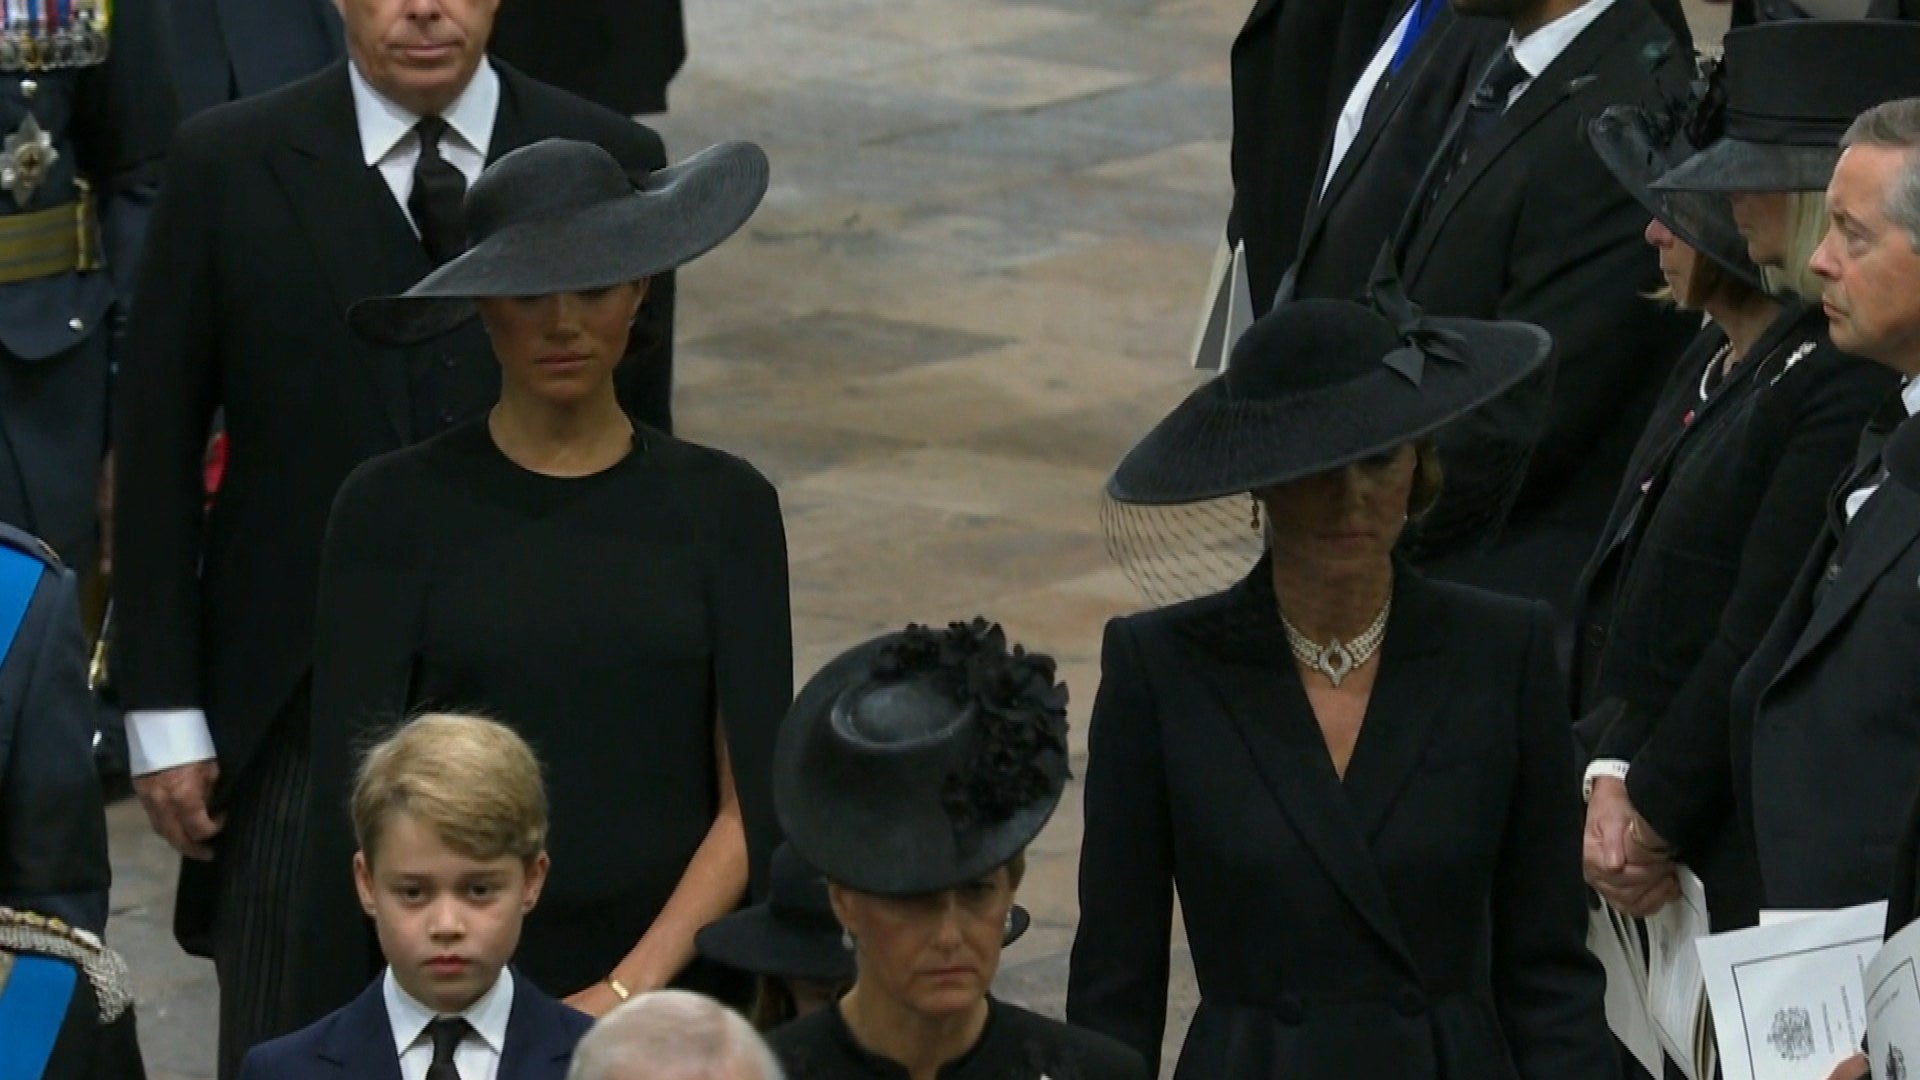 Fashion royalty puts on a final show at Alexander McQueen's funeral